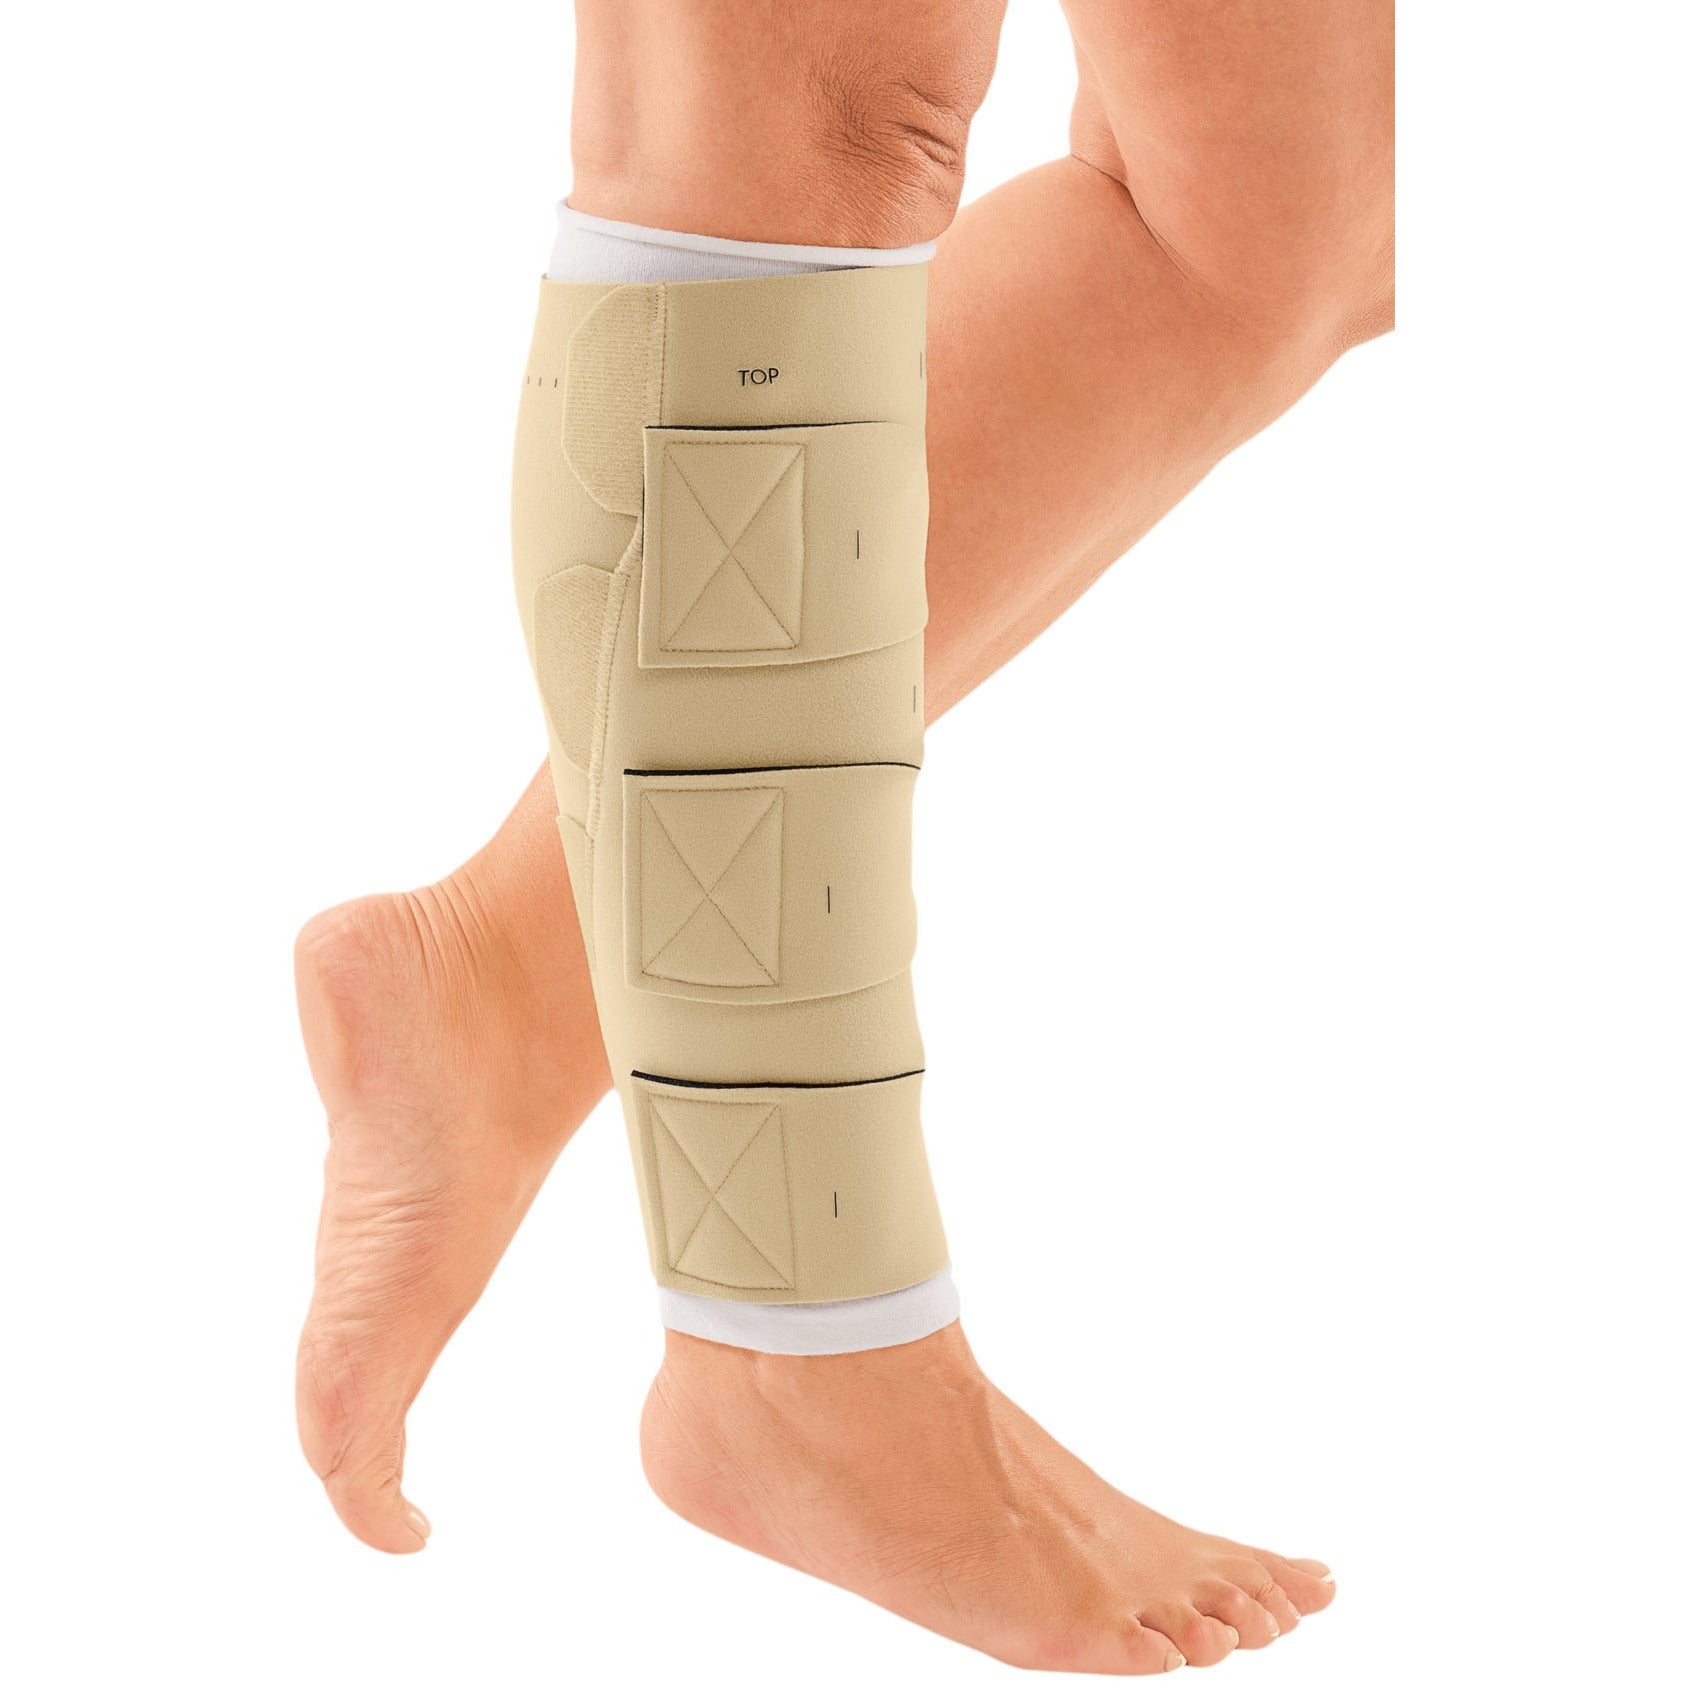 CircAid Reduction Kit for Lower Leg Lymphedema – Compression Store